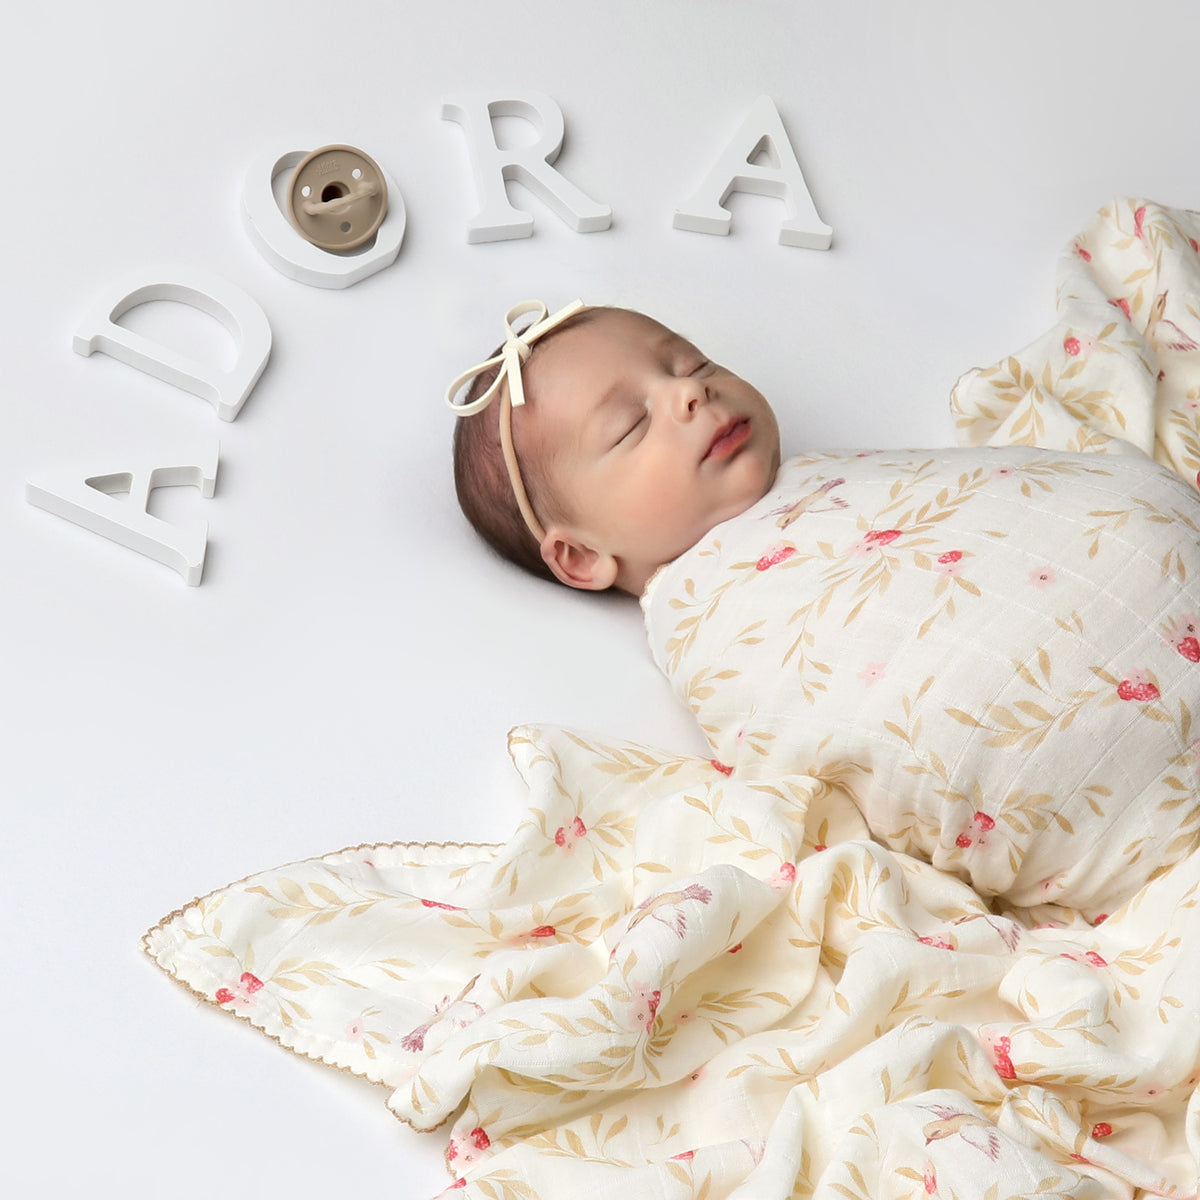 Floral Girls Swaddle + Cloth